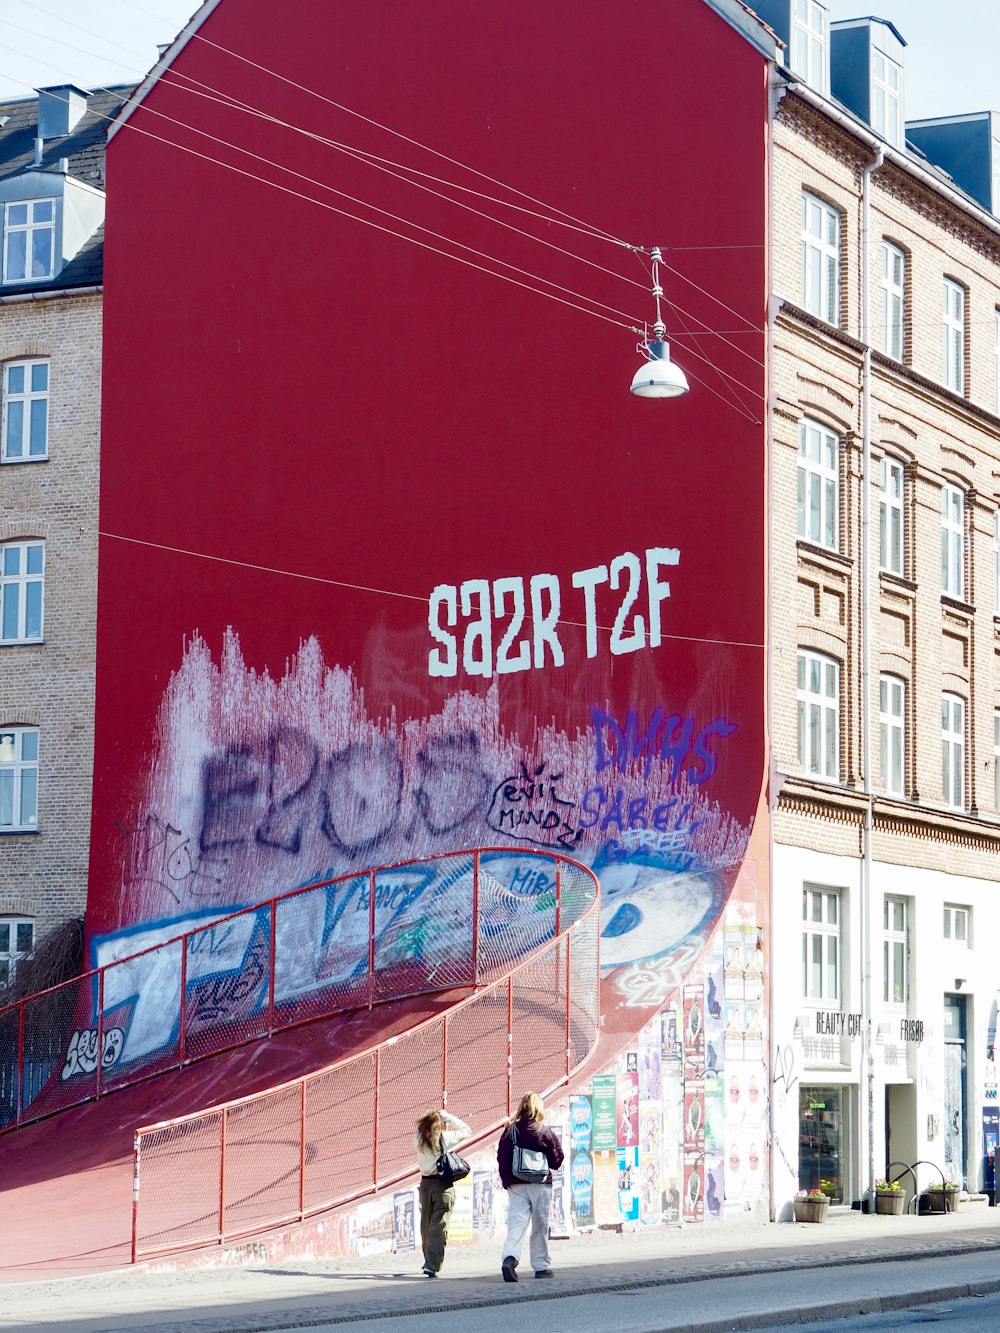 a large red building with graffiti on the side of it